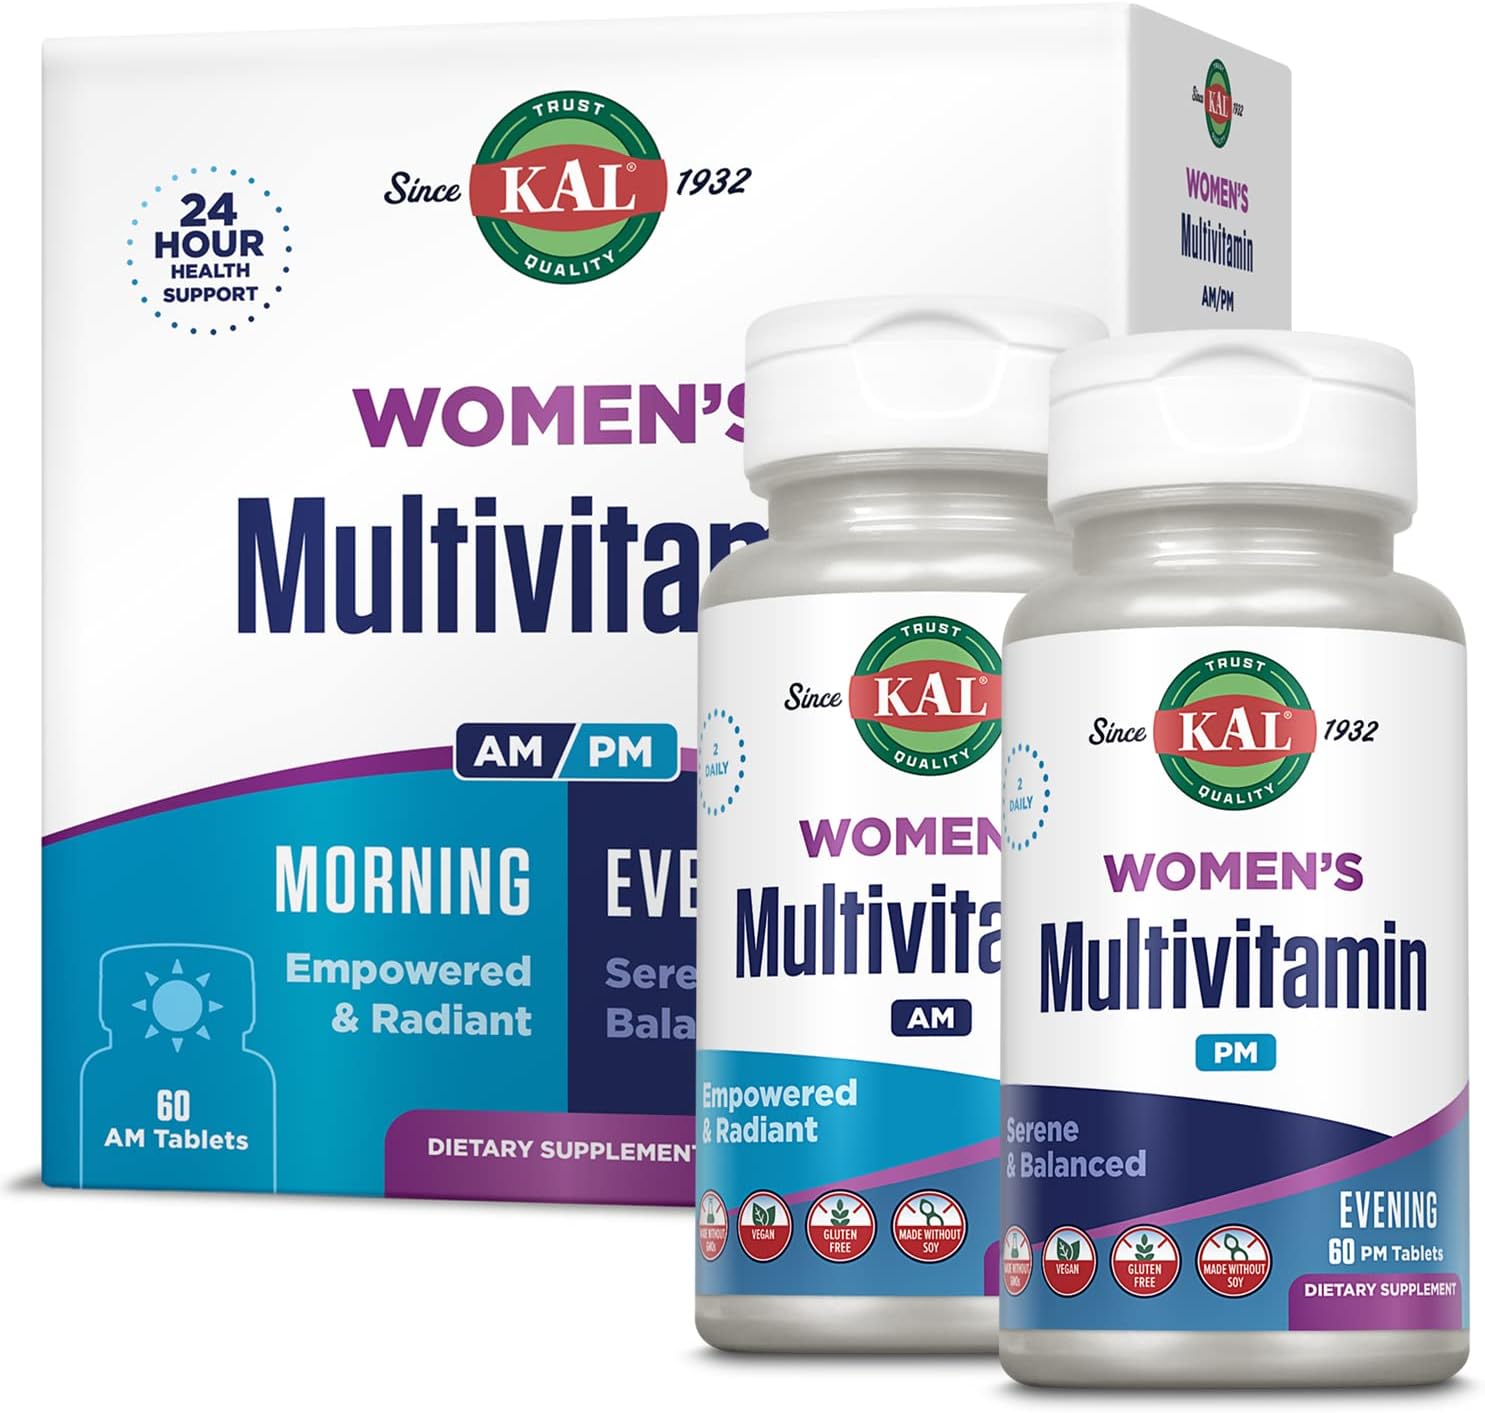 KAL Women's Multivitamin AM/PM, 2-in-1 Multivitamins for Women with As